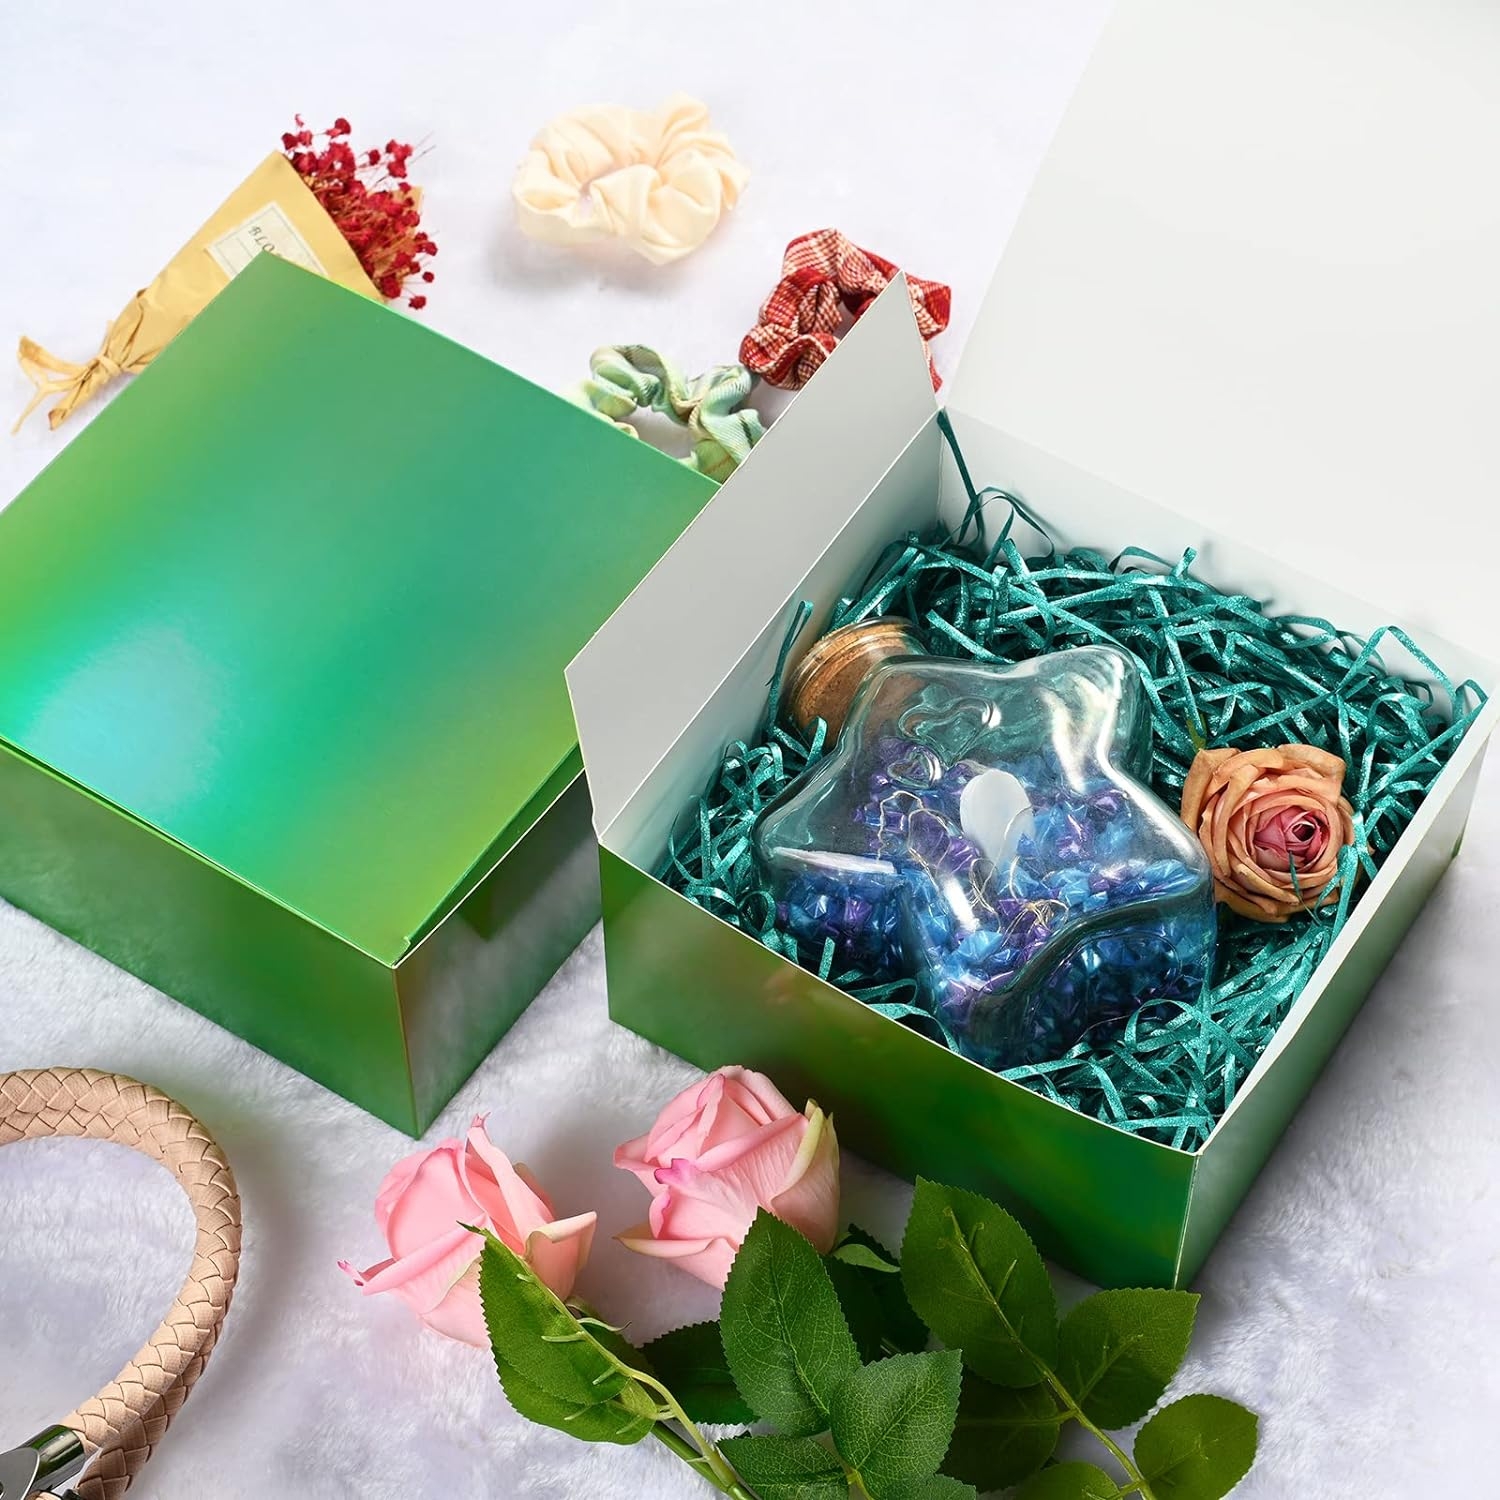 SHANSVYE Gift Boxes,Gift Boxes with Lids,10 pcs 8x8x4in Gift Boxes for Presents,Holographic Green Gradient Boxes,Bridesmaid Proposal Boxes,Decorative Gift Boxes Bulk,Boxes for Gifts,Birthday, Christmas, Wedding, Party Favor (10, Gradient Green)